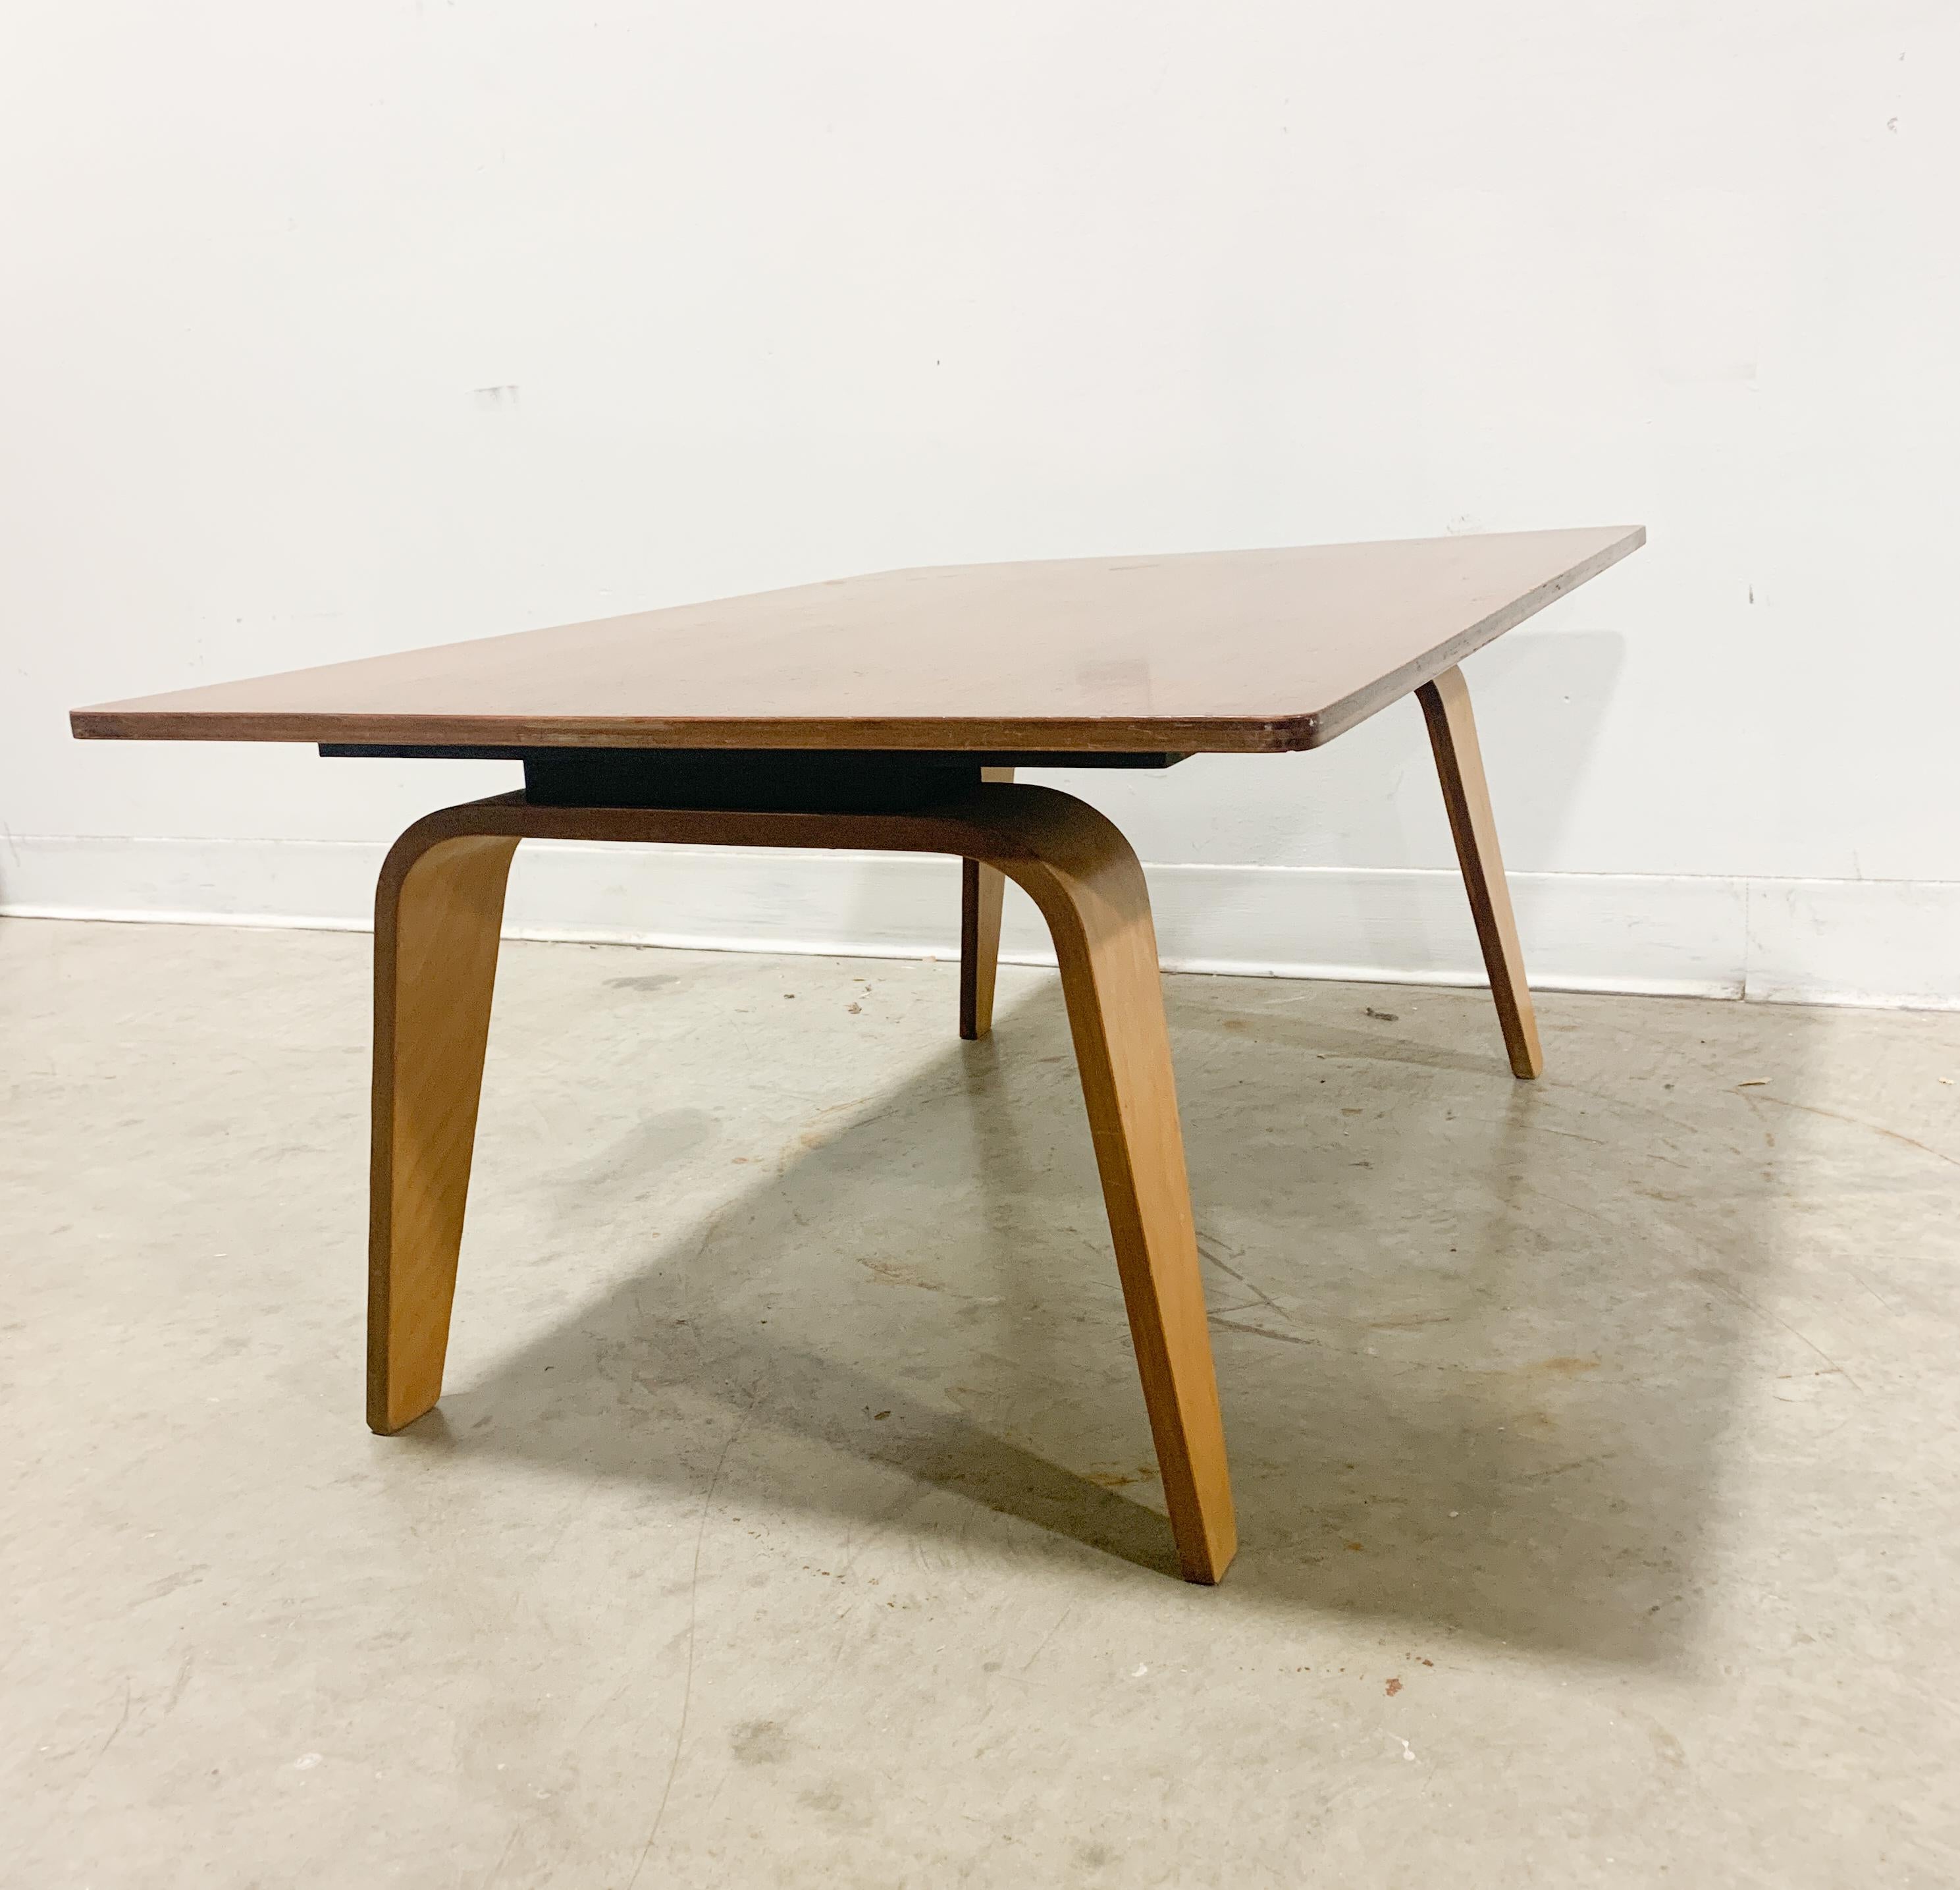 This is a rare and highly collectible Eames table model OTW (Oblong Table Wood) probably made by Evans Products pre-Herman Miller. Designed in 1946 by Charles and Ray Eames, the Walnut top is 5 plys, the black sub frame is nailed on, and the legs